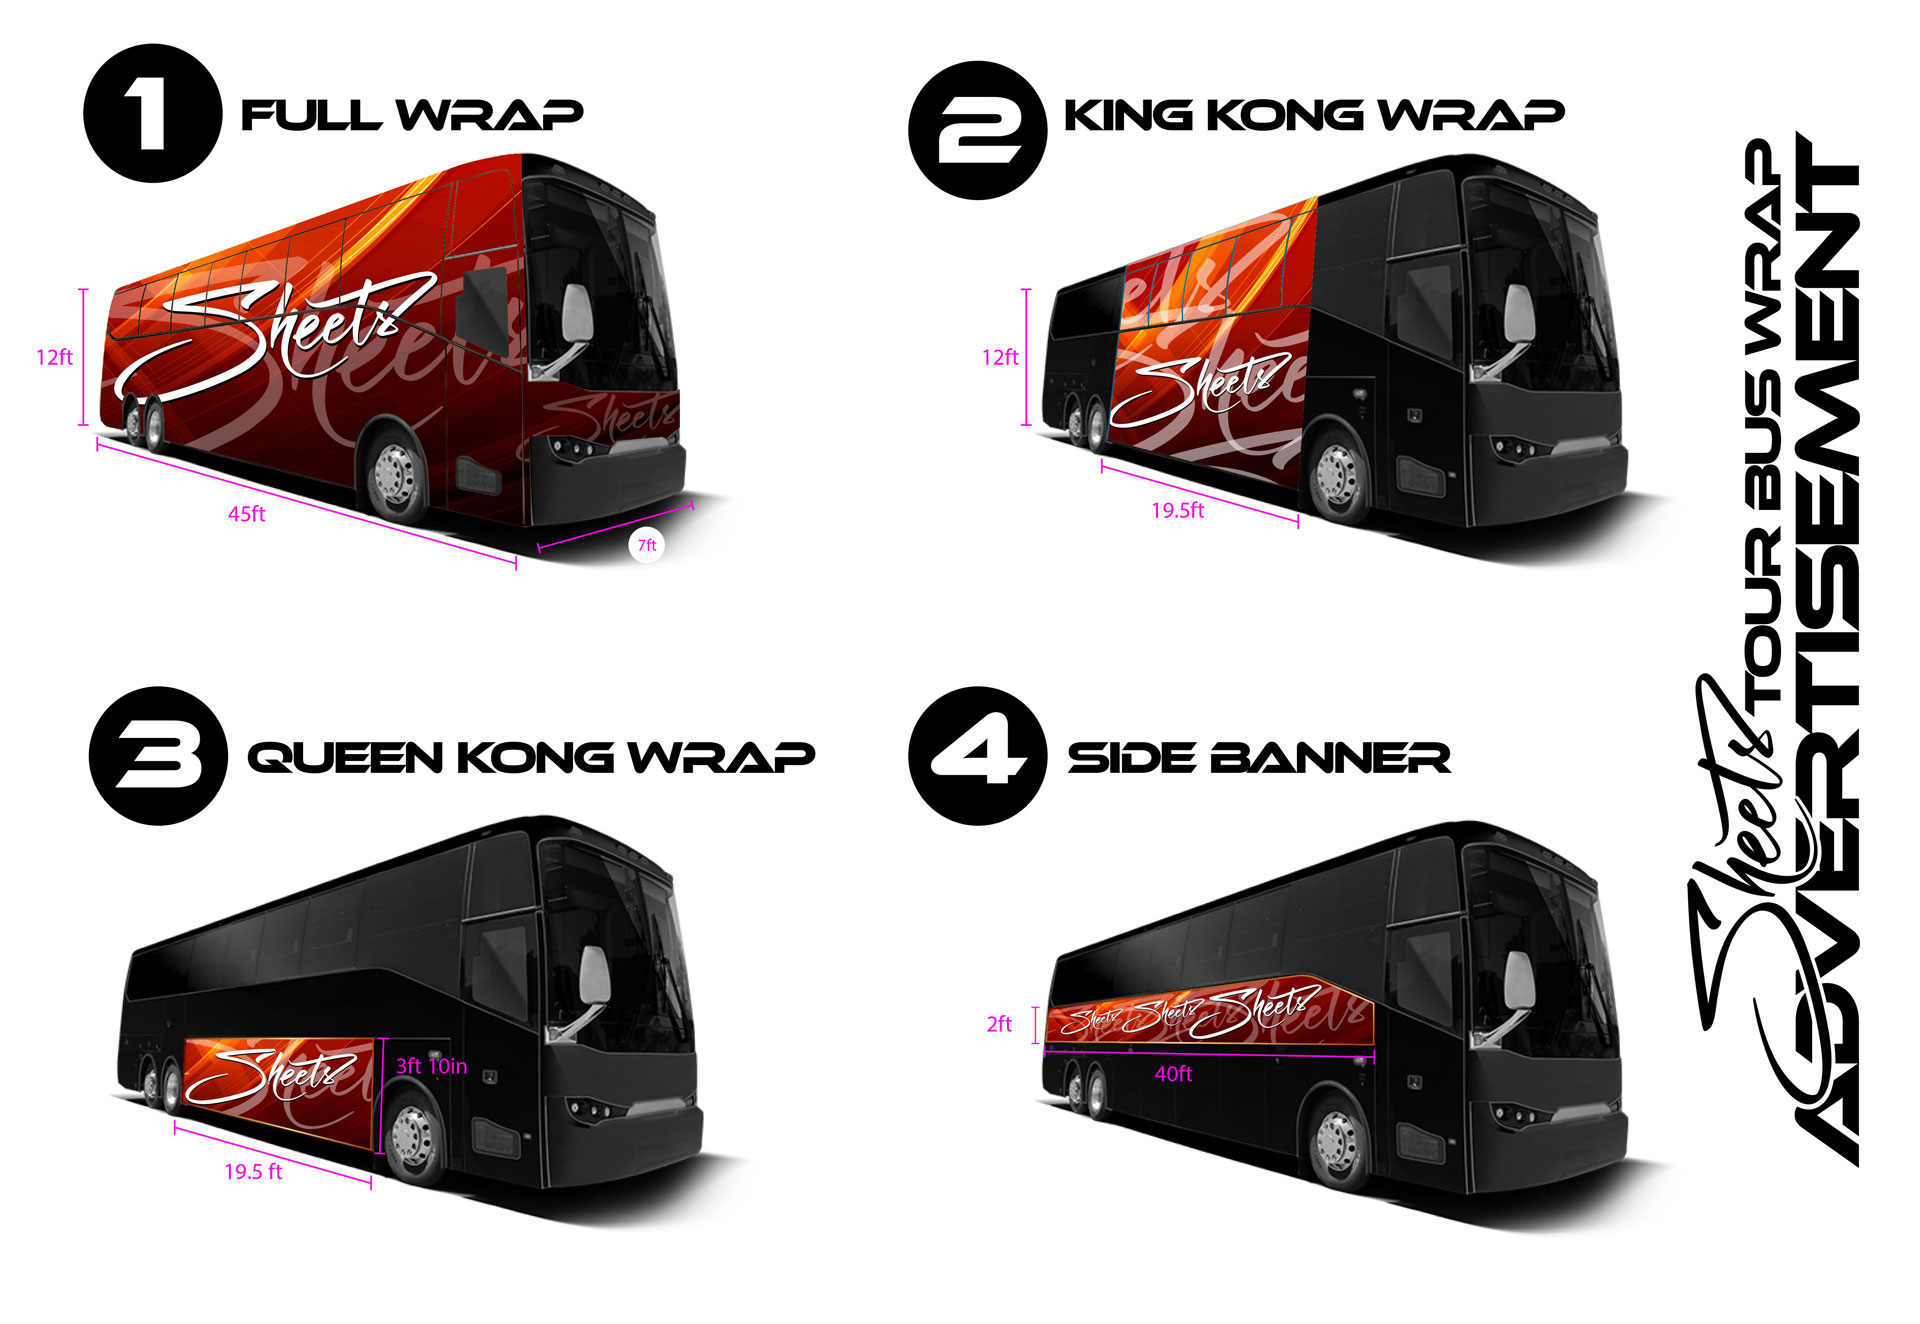 Examples of Charter Bus Wraps